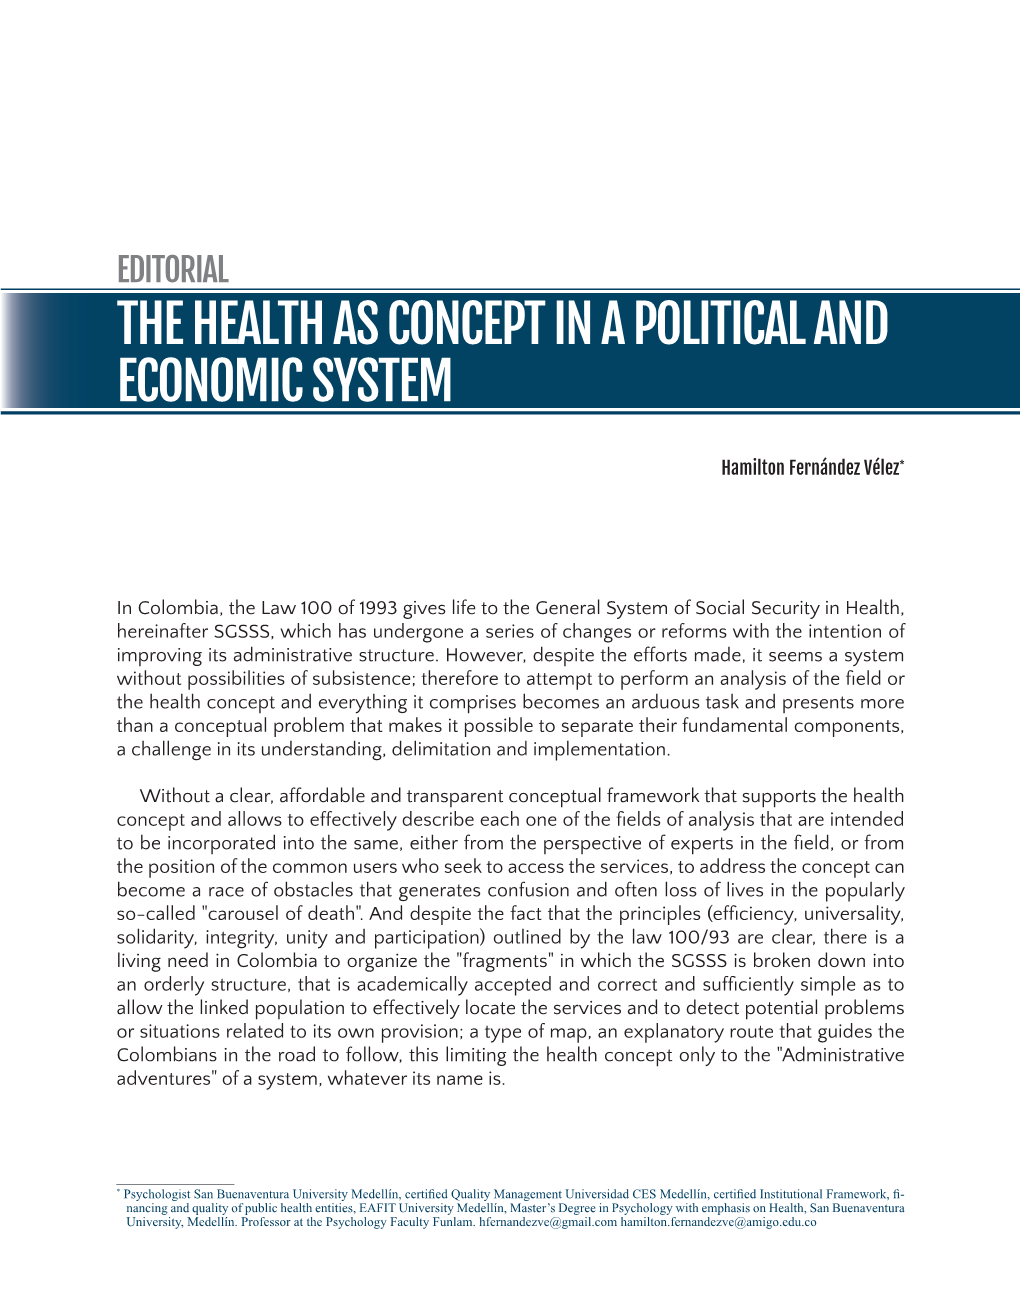 The Health As Concept in a Political and Economic System